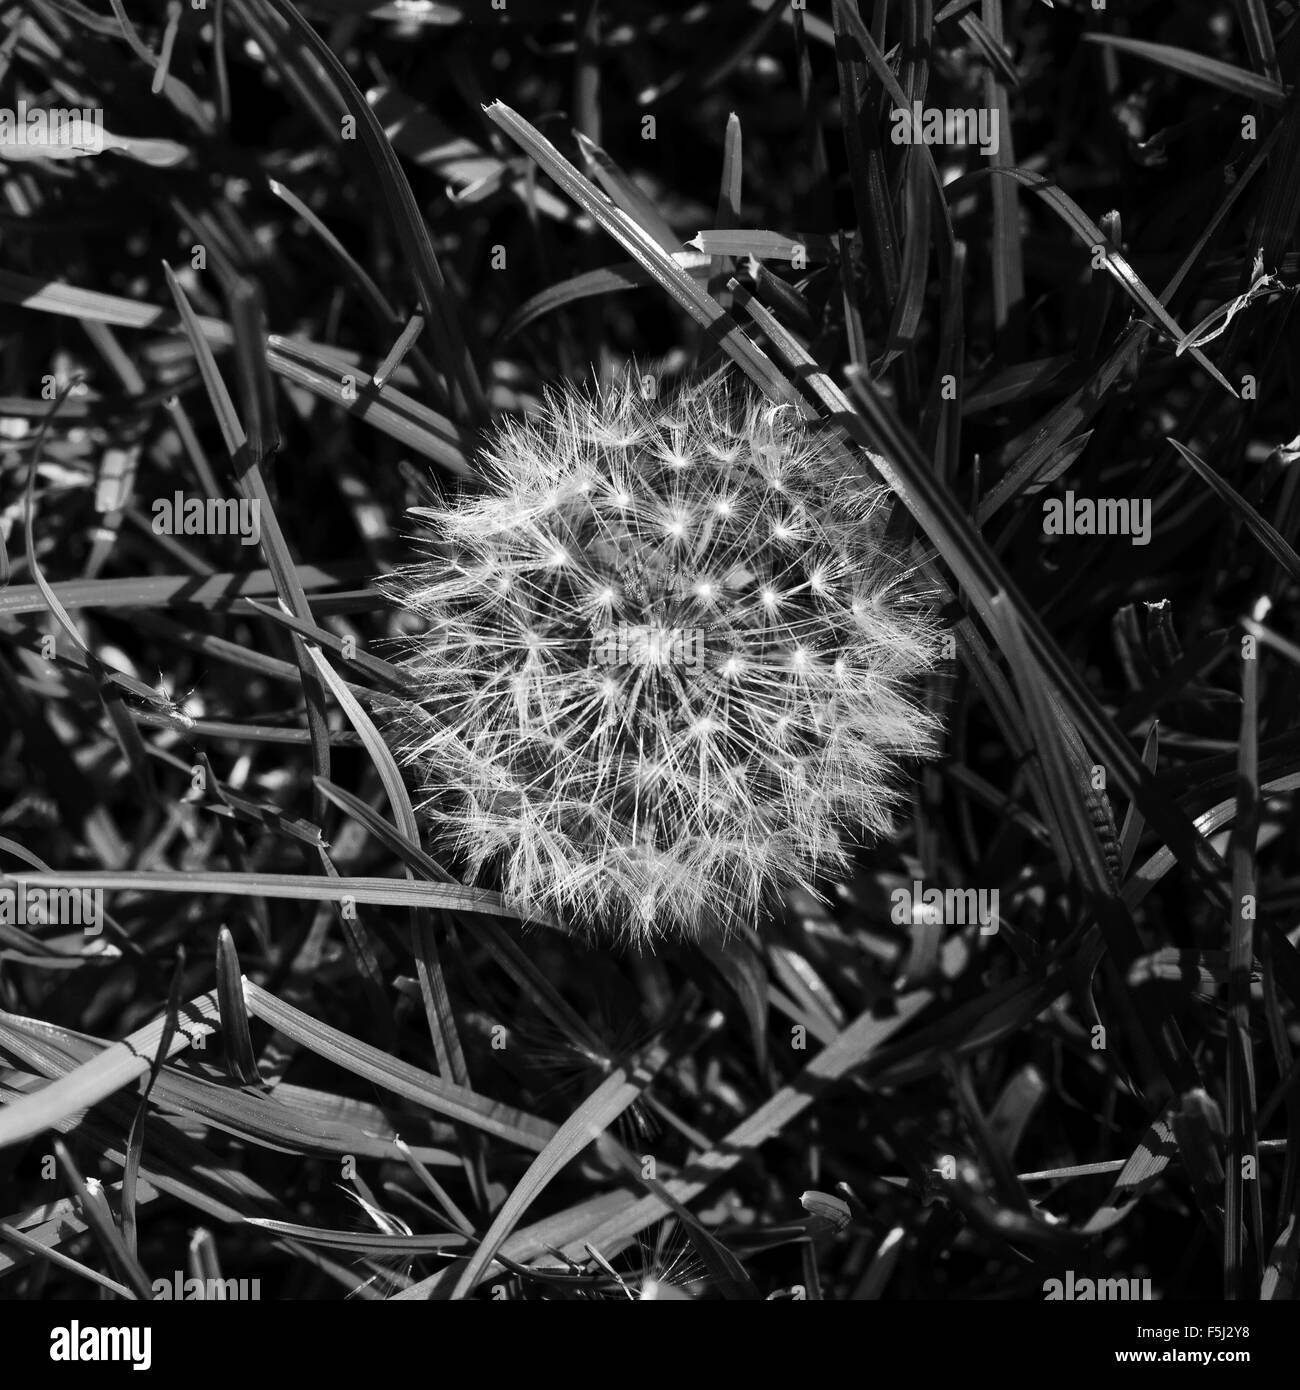 A Dandelion seed head in grass Stock Photo